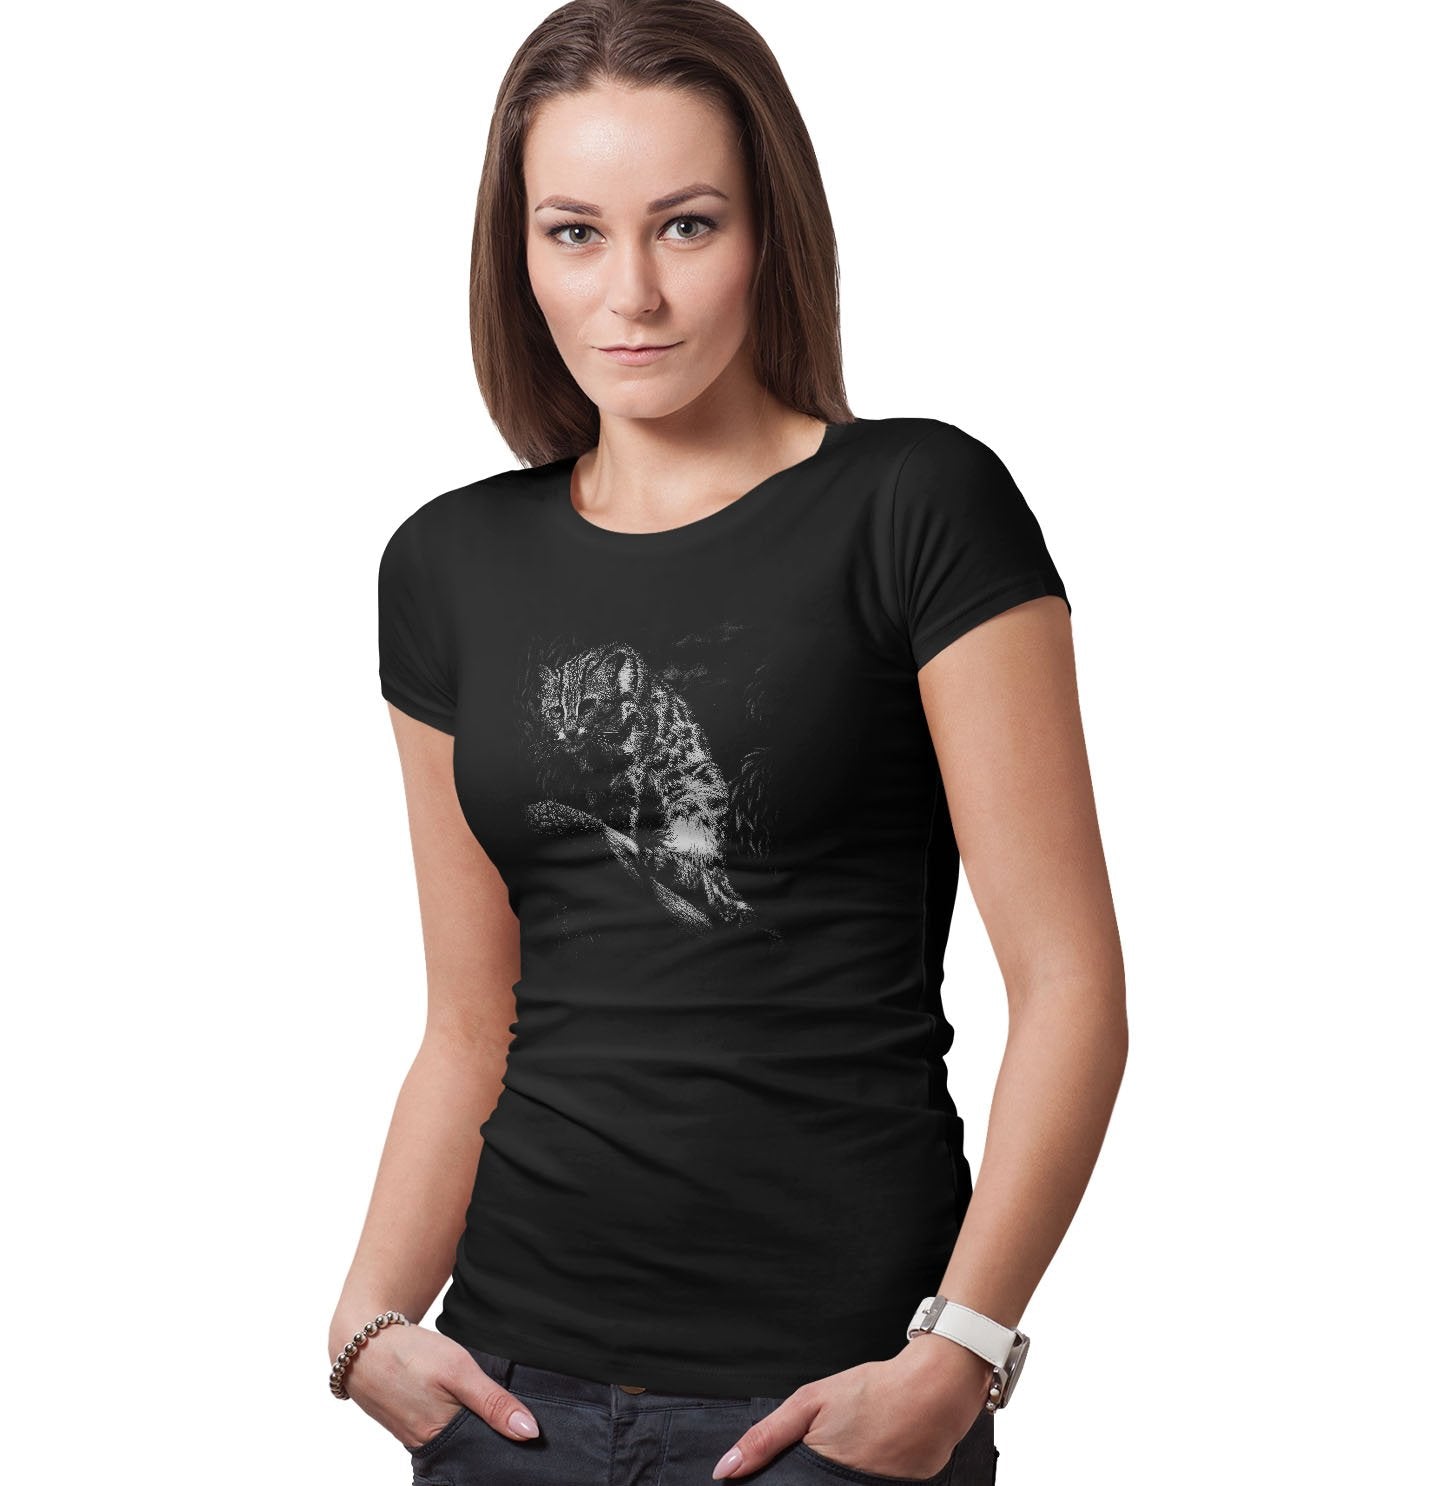 Leopardcat on Black - Women's Fitted T-Shirt - Animal Tee